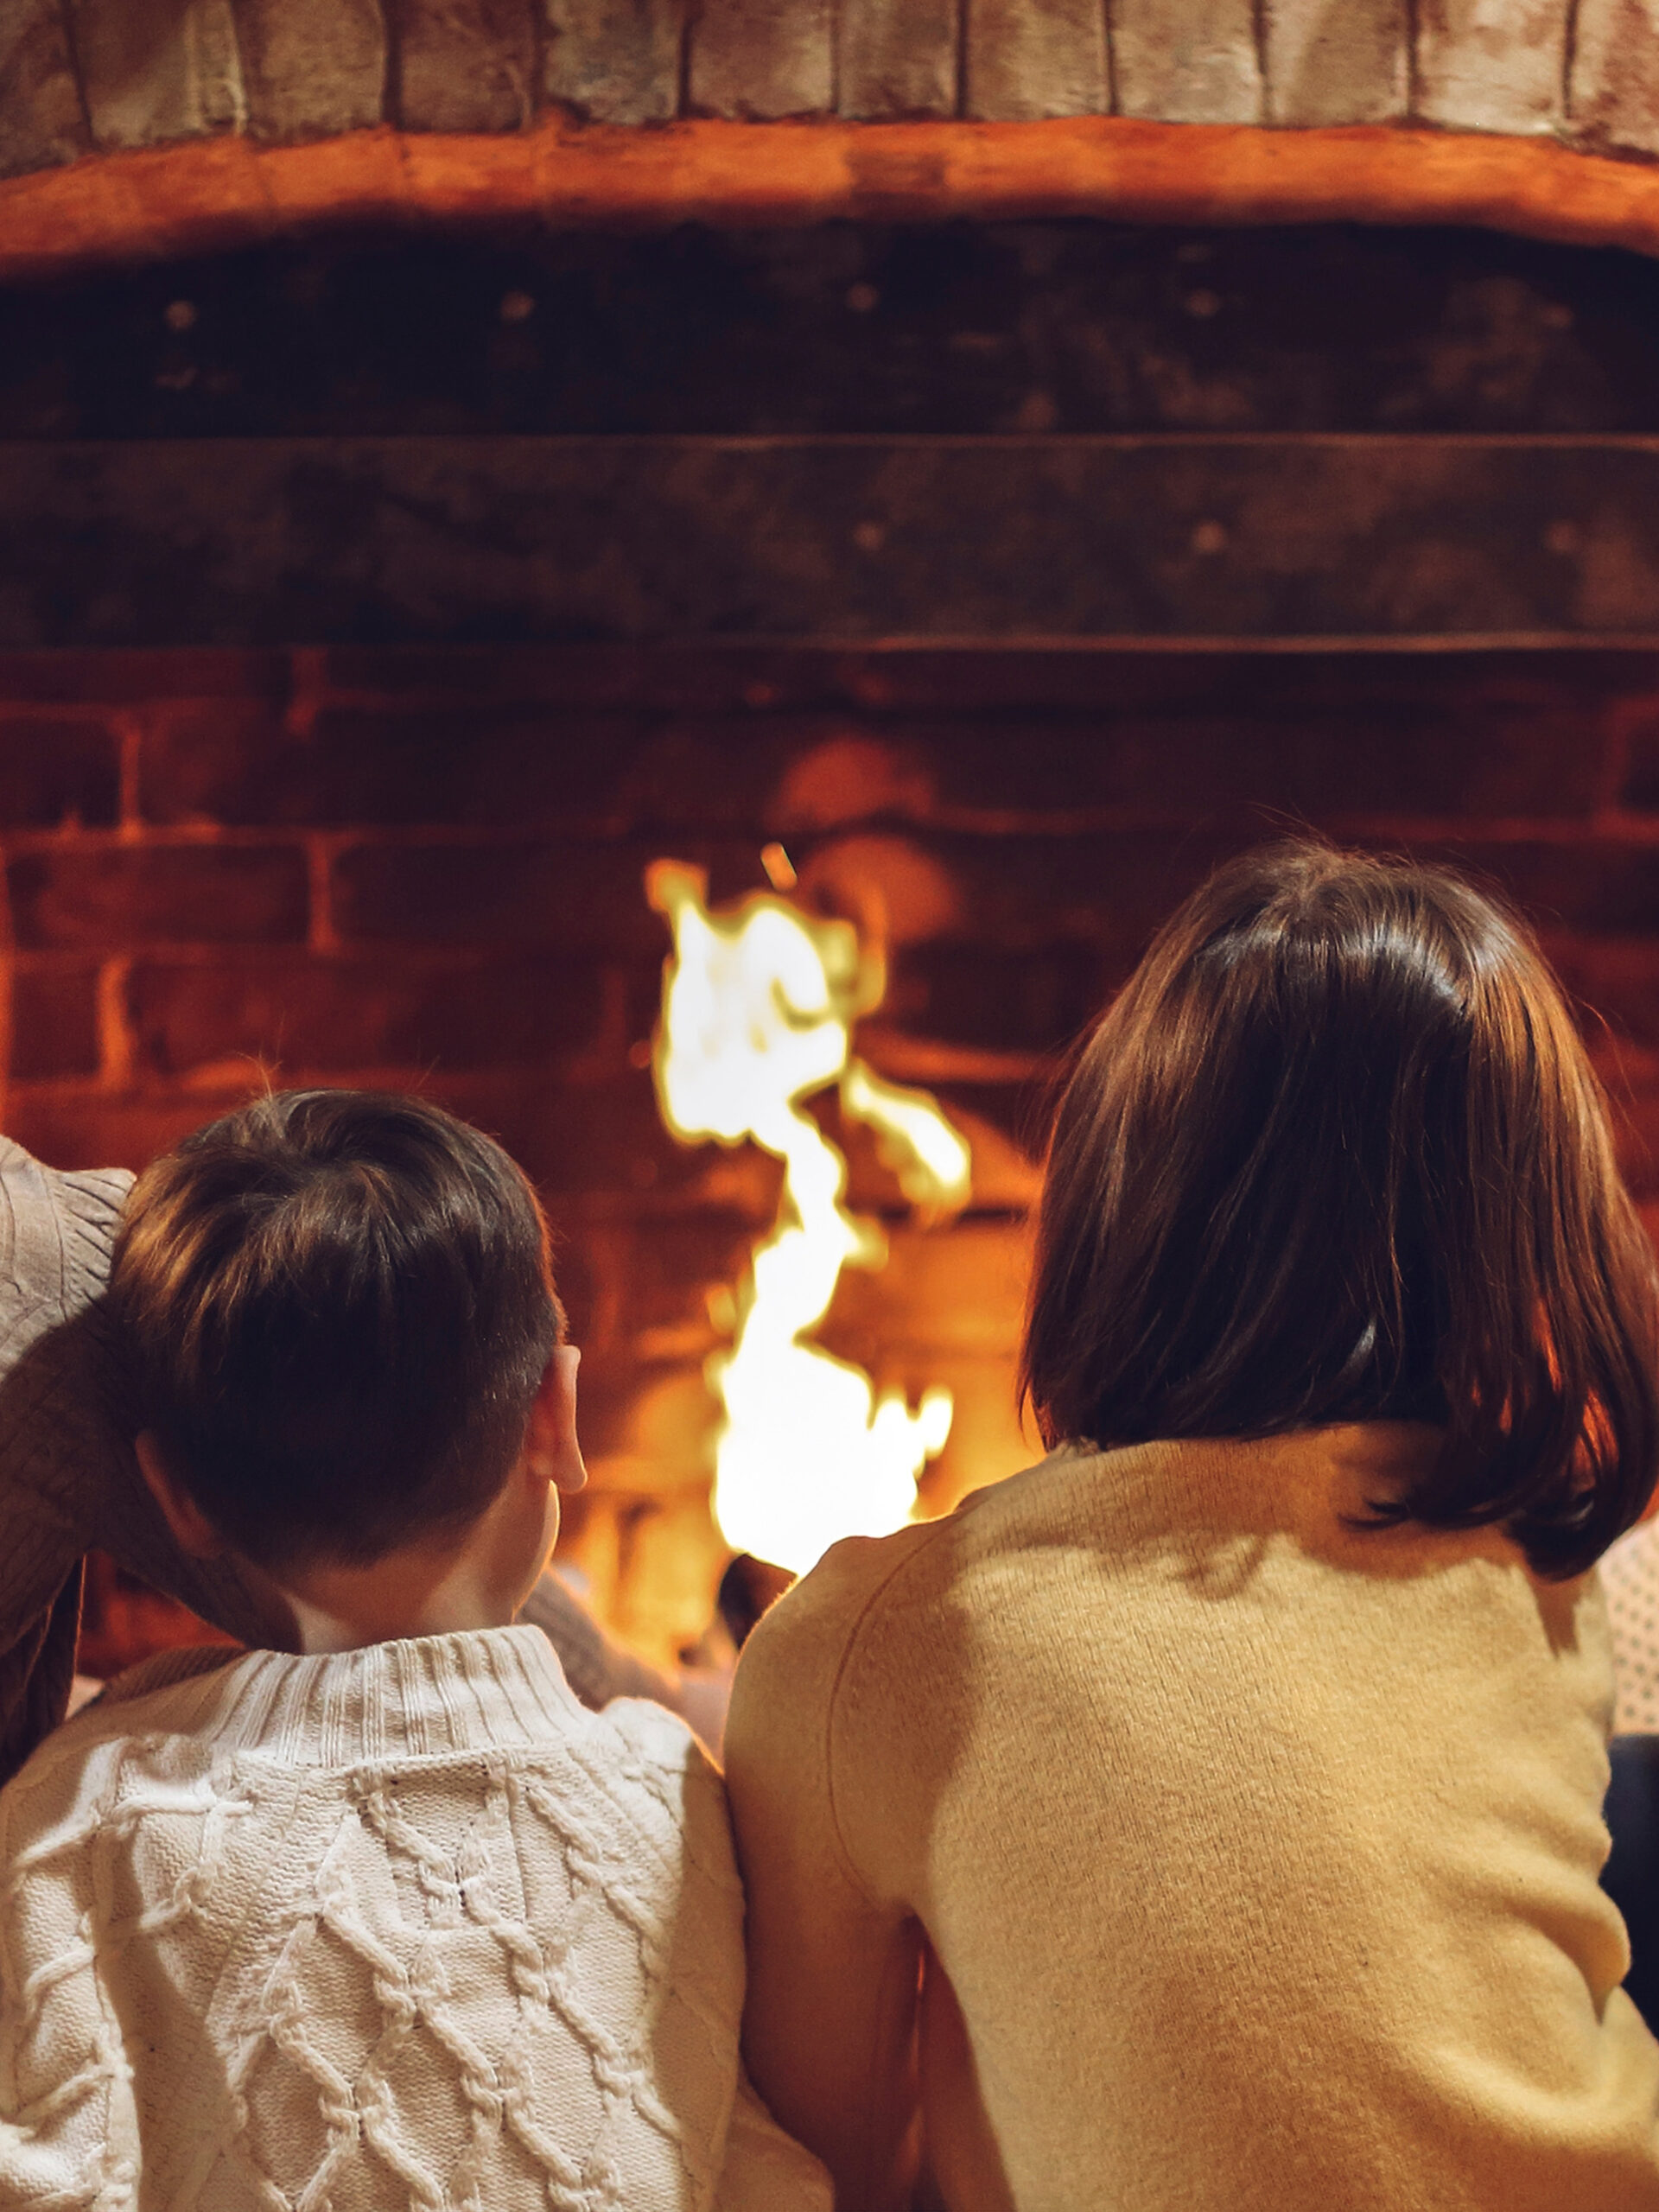 Two kids sit in front of fire - holiday safety tips for families from CHOC